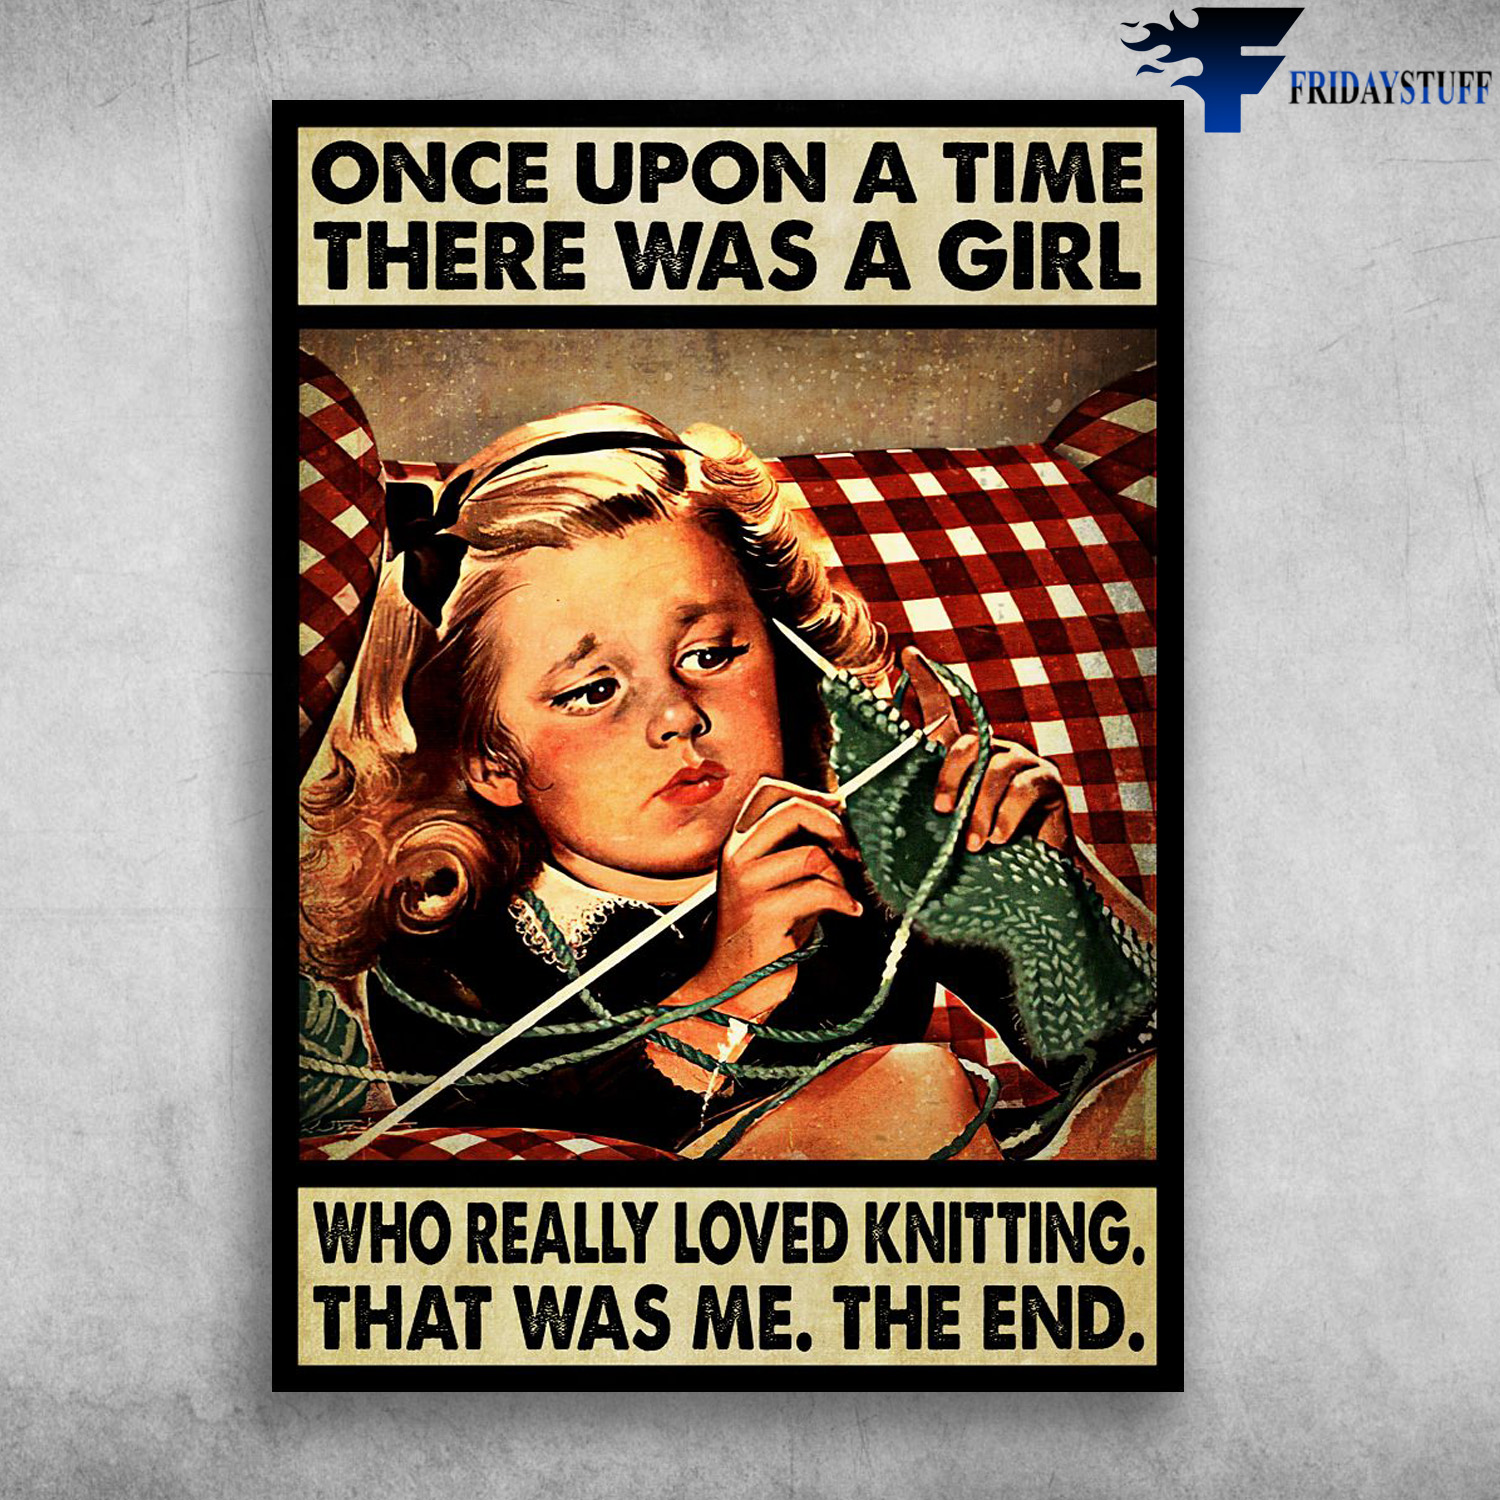 Little Girl Knitting - Once Upon A Time, There Was A Girl, Who Really Loved Knitting, That Was Me, The End